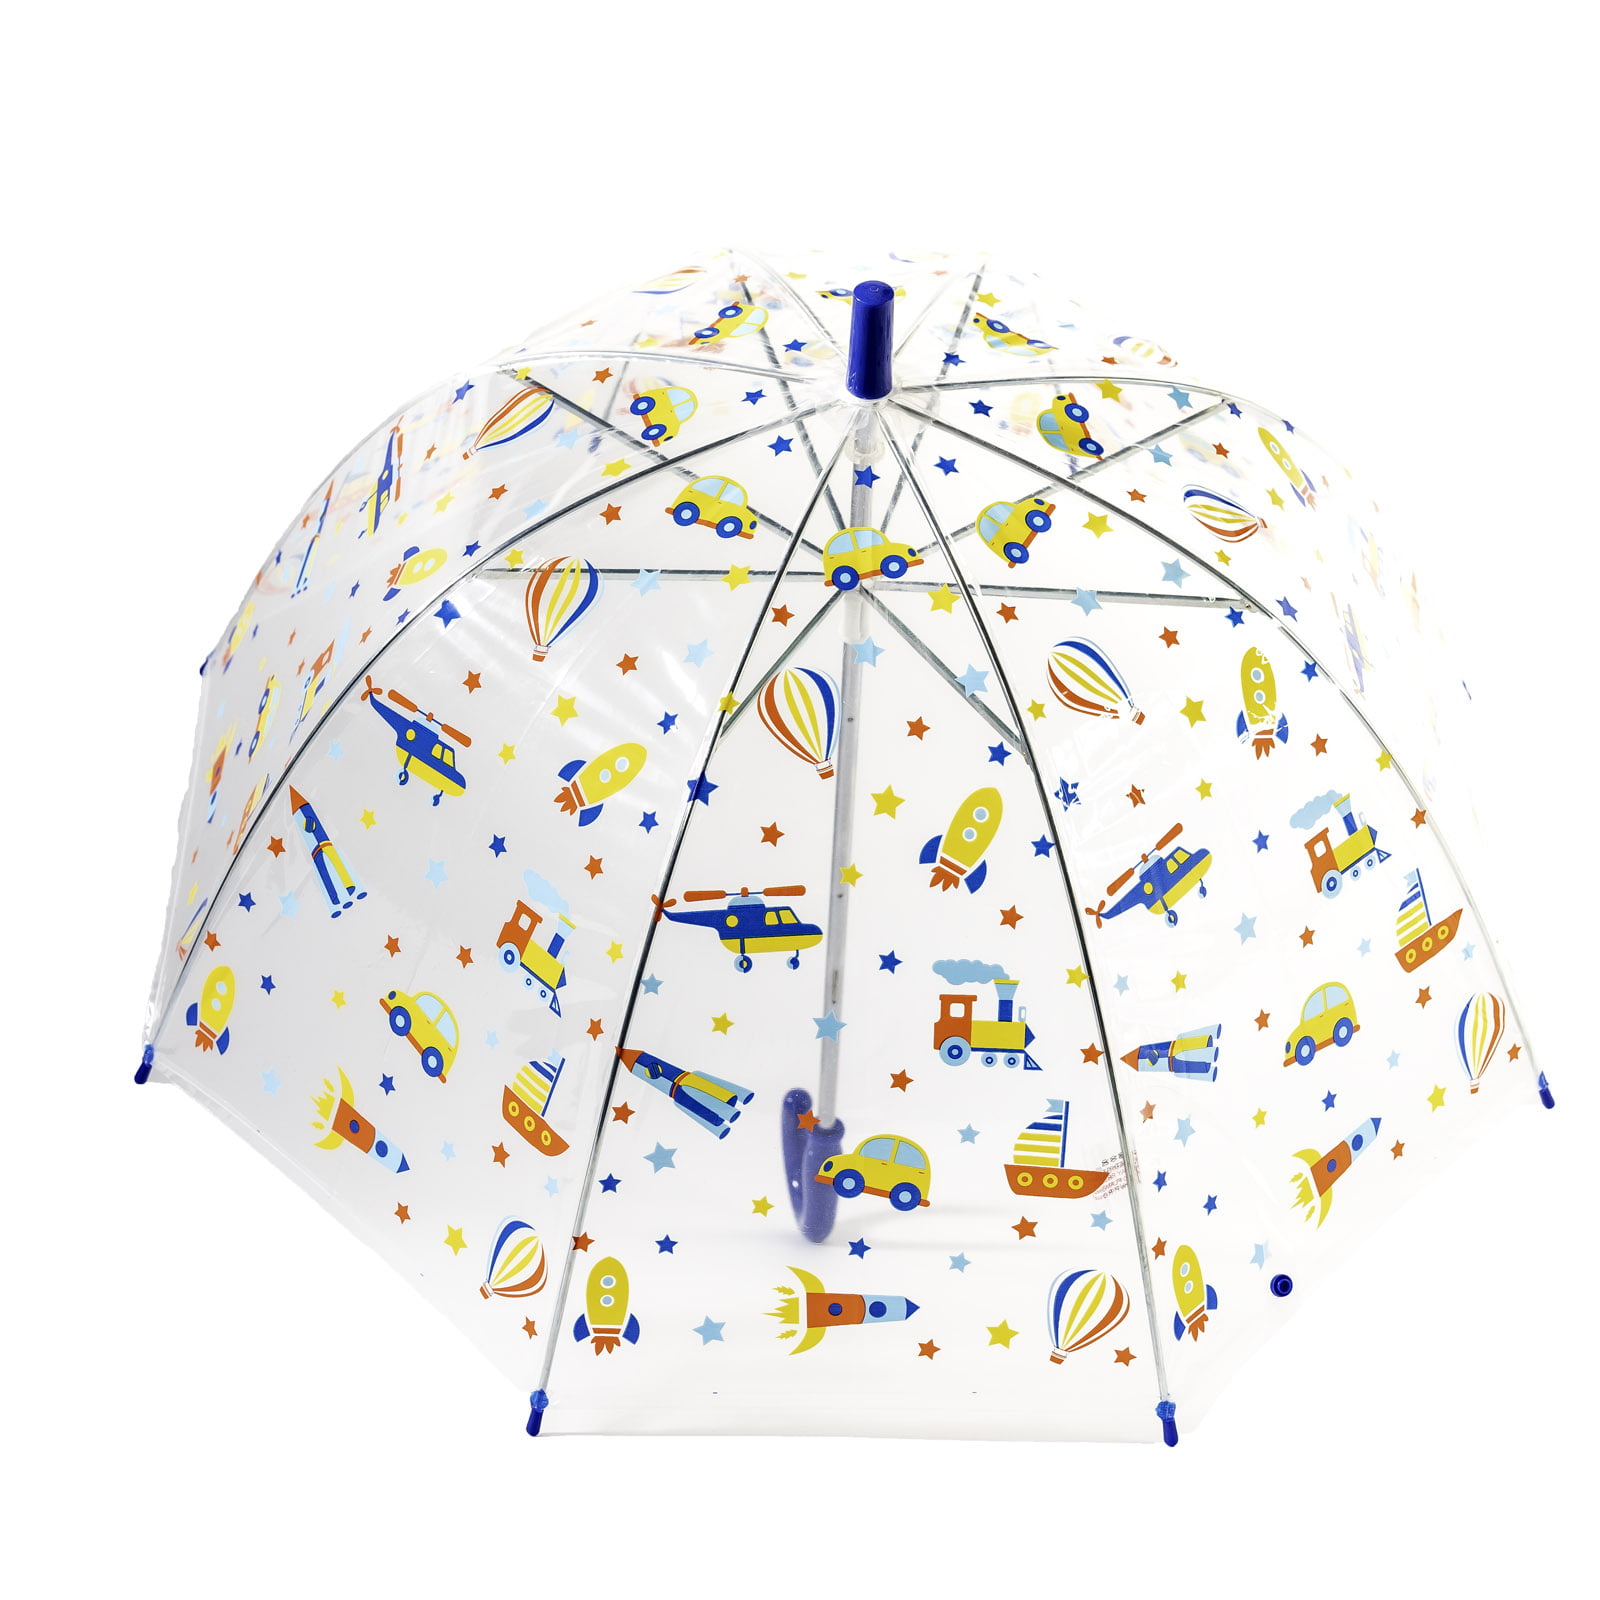 Boy's clear dome umbrella canopy viewed from above